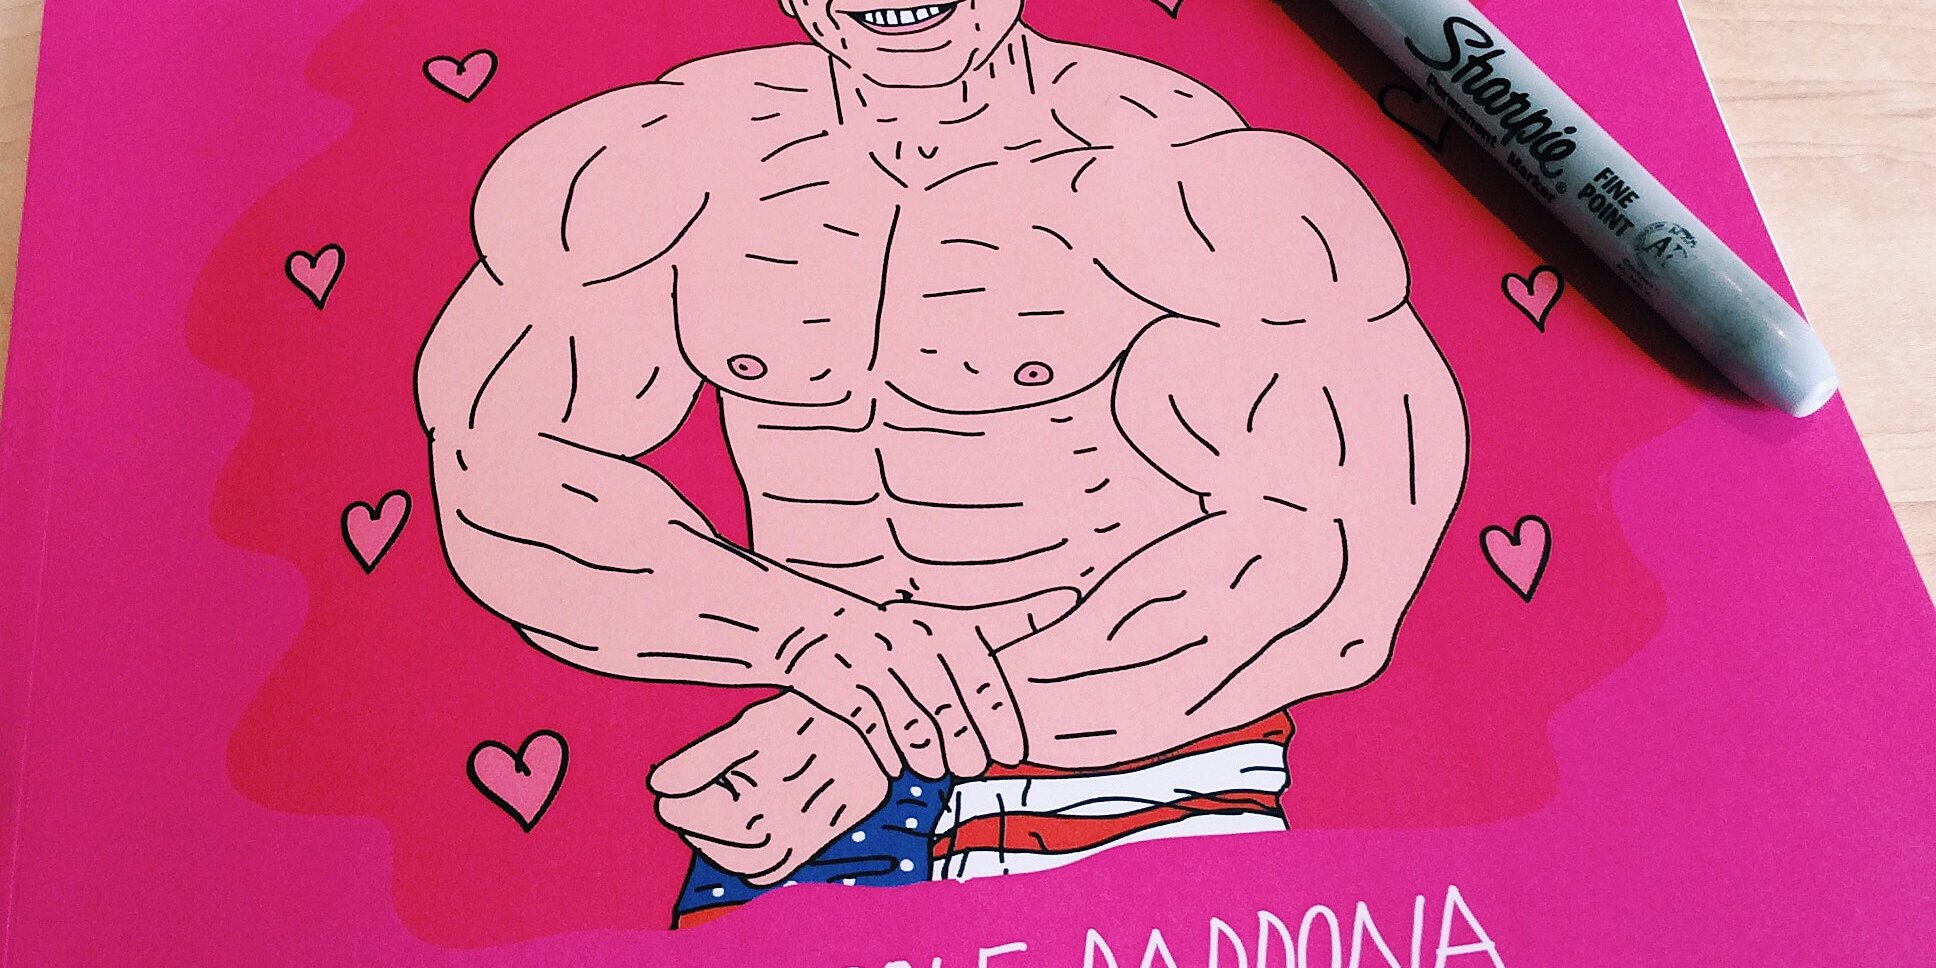 There is now a buff Bernie Sanders coloring book. Just FYI. | HelloGiggles